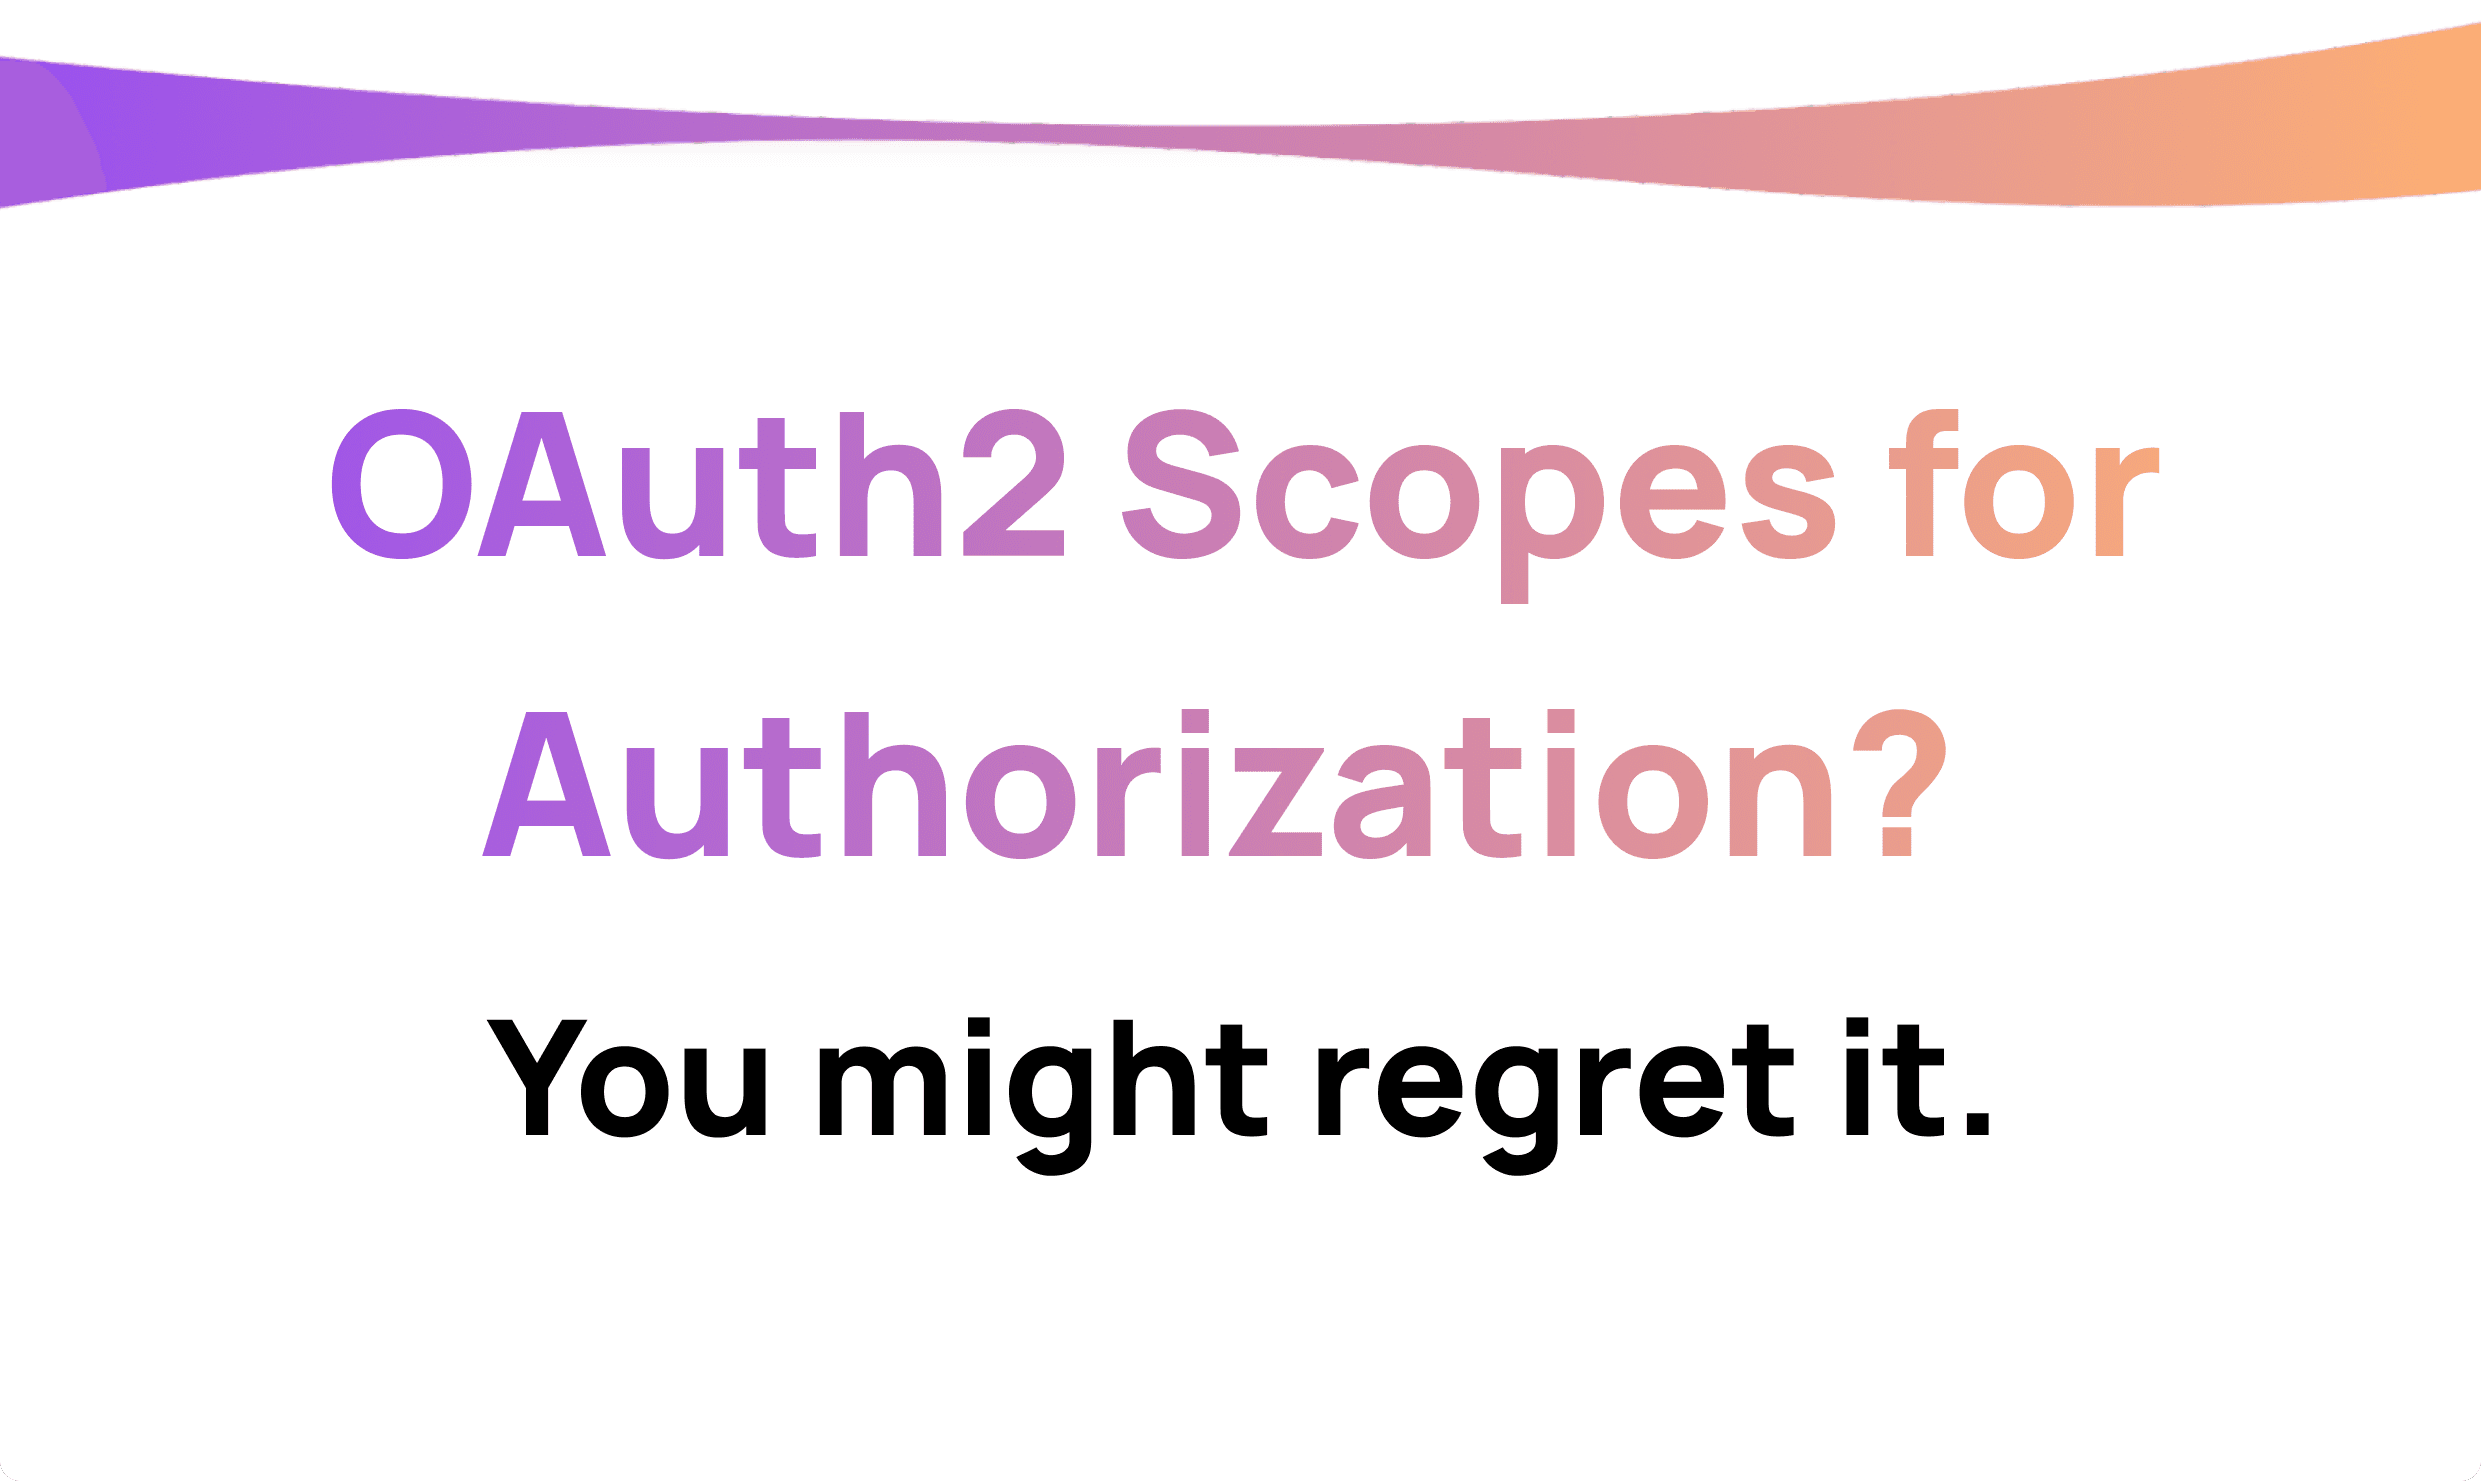 Using OAuth2 Scopes for Authorization? You might regret it